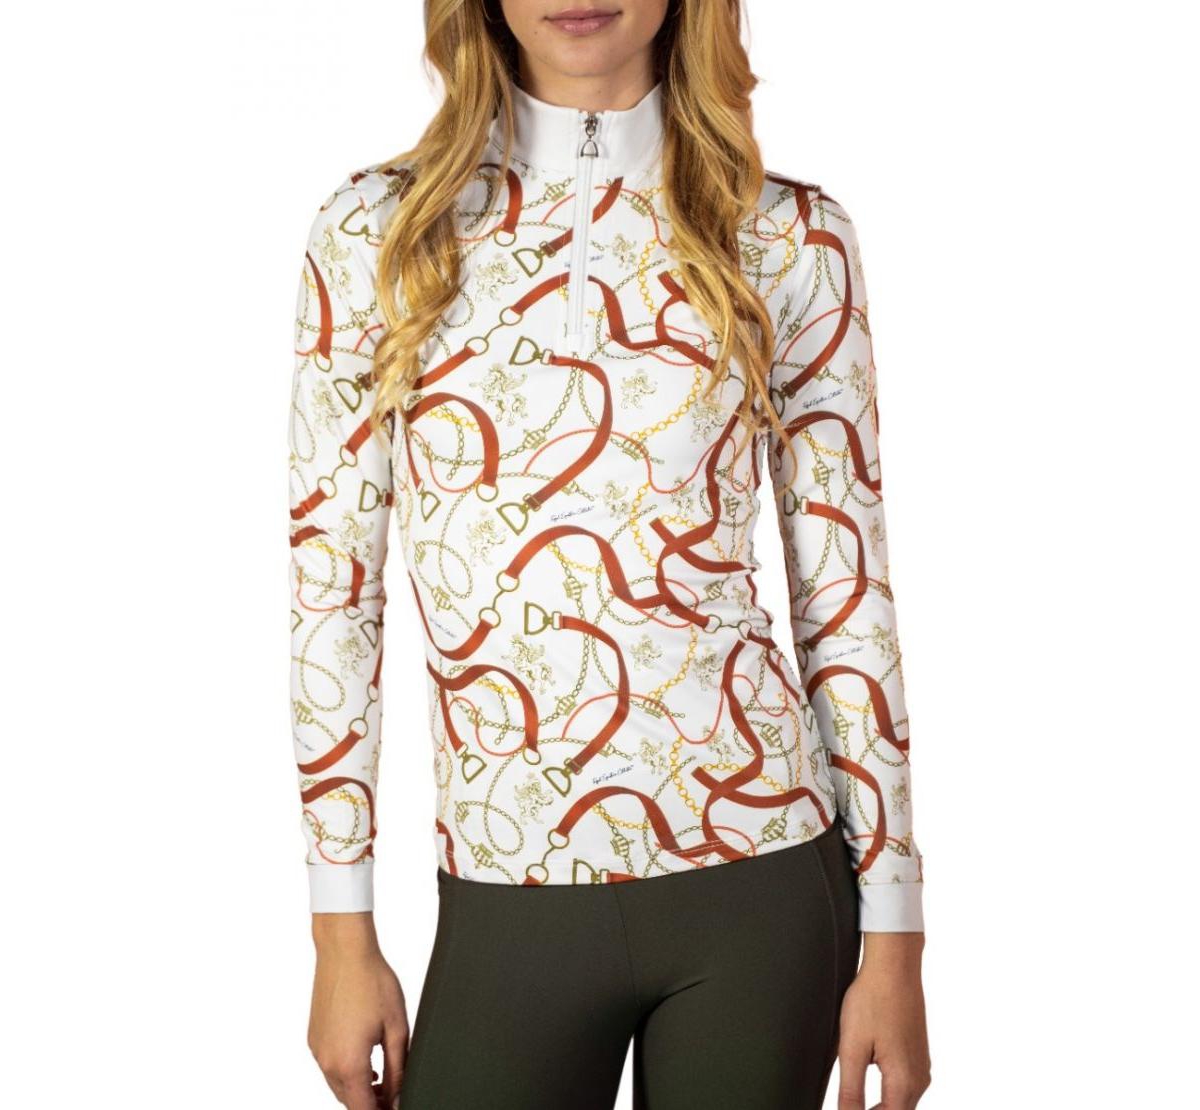 Royal Equestrian Base Layer Cavalla Mock Neck Sport Top - White with print